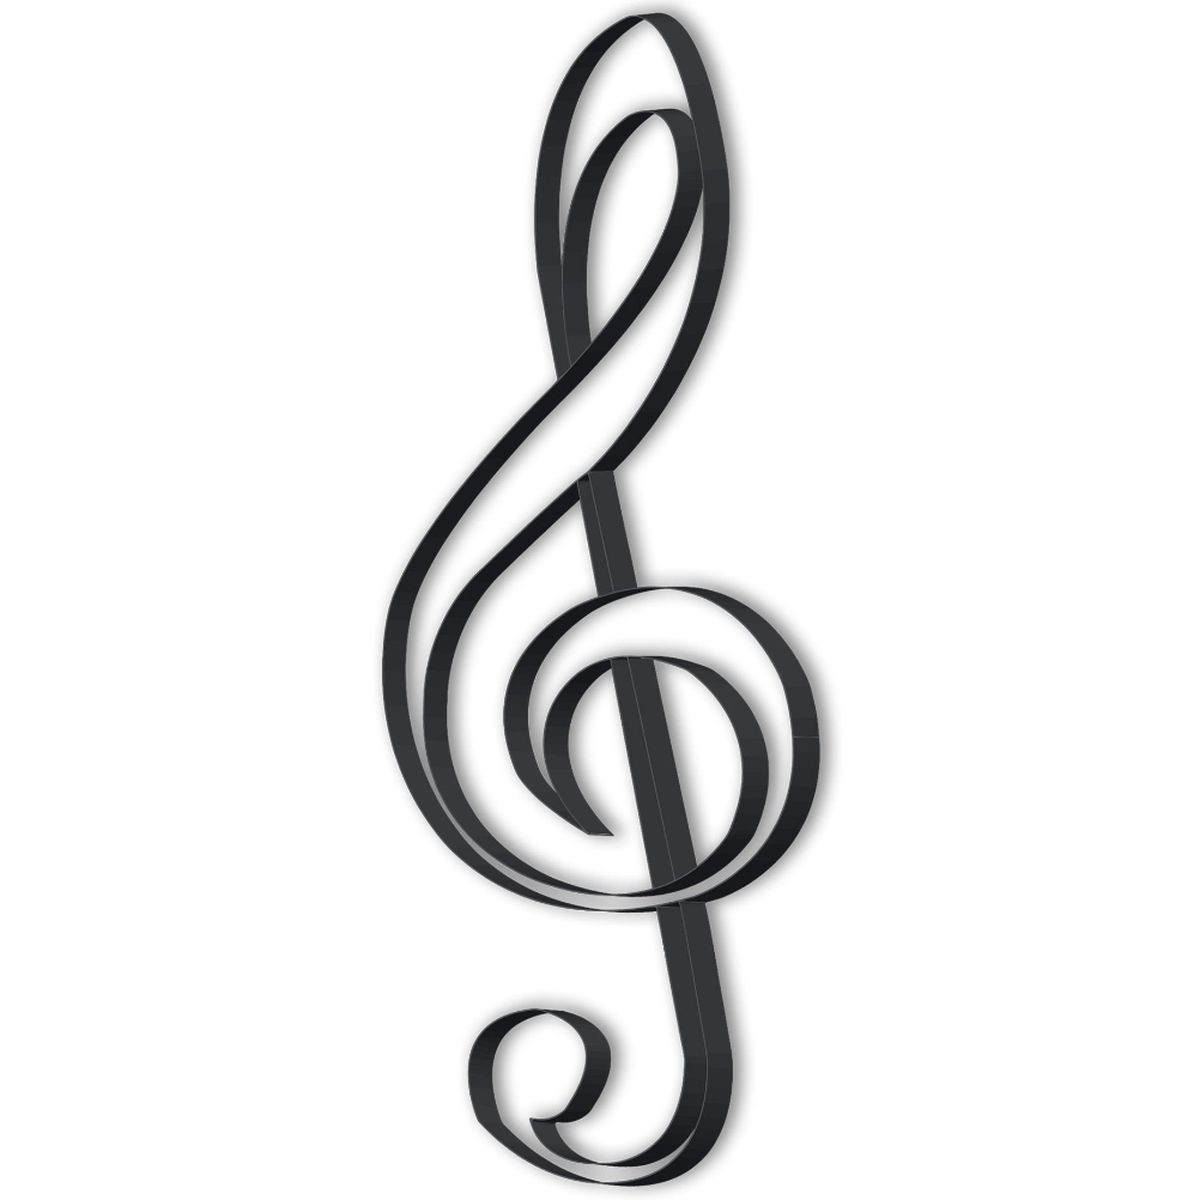 Decorative treble clef to attach to the wall